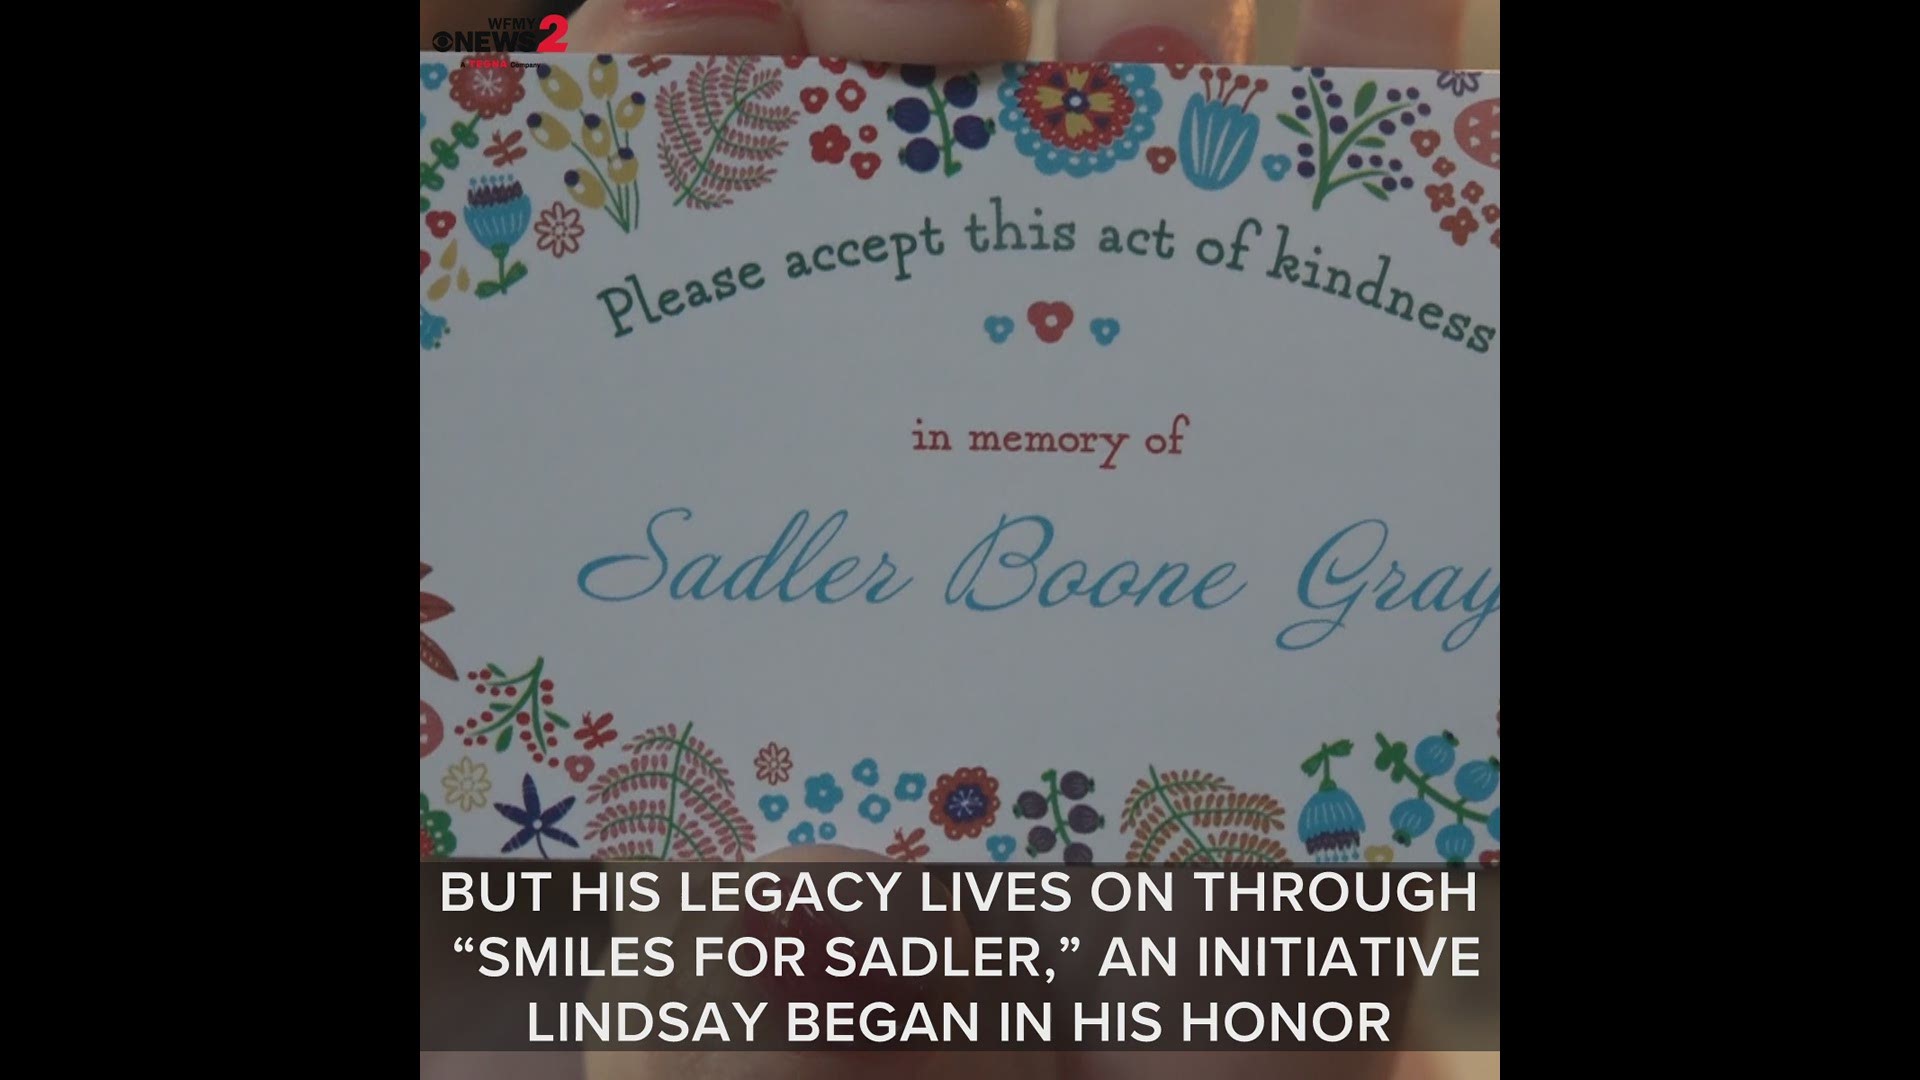 The Gray Family said good-bye to their son Sadler's earthly body, but his legacy lives on through "Smiles for Sadler," an initiative Lindsay began in his honor.